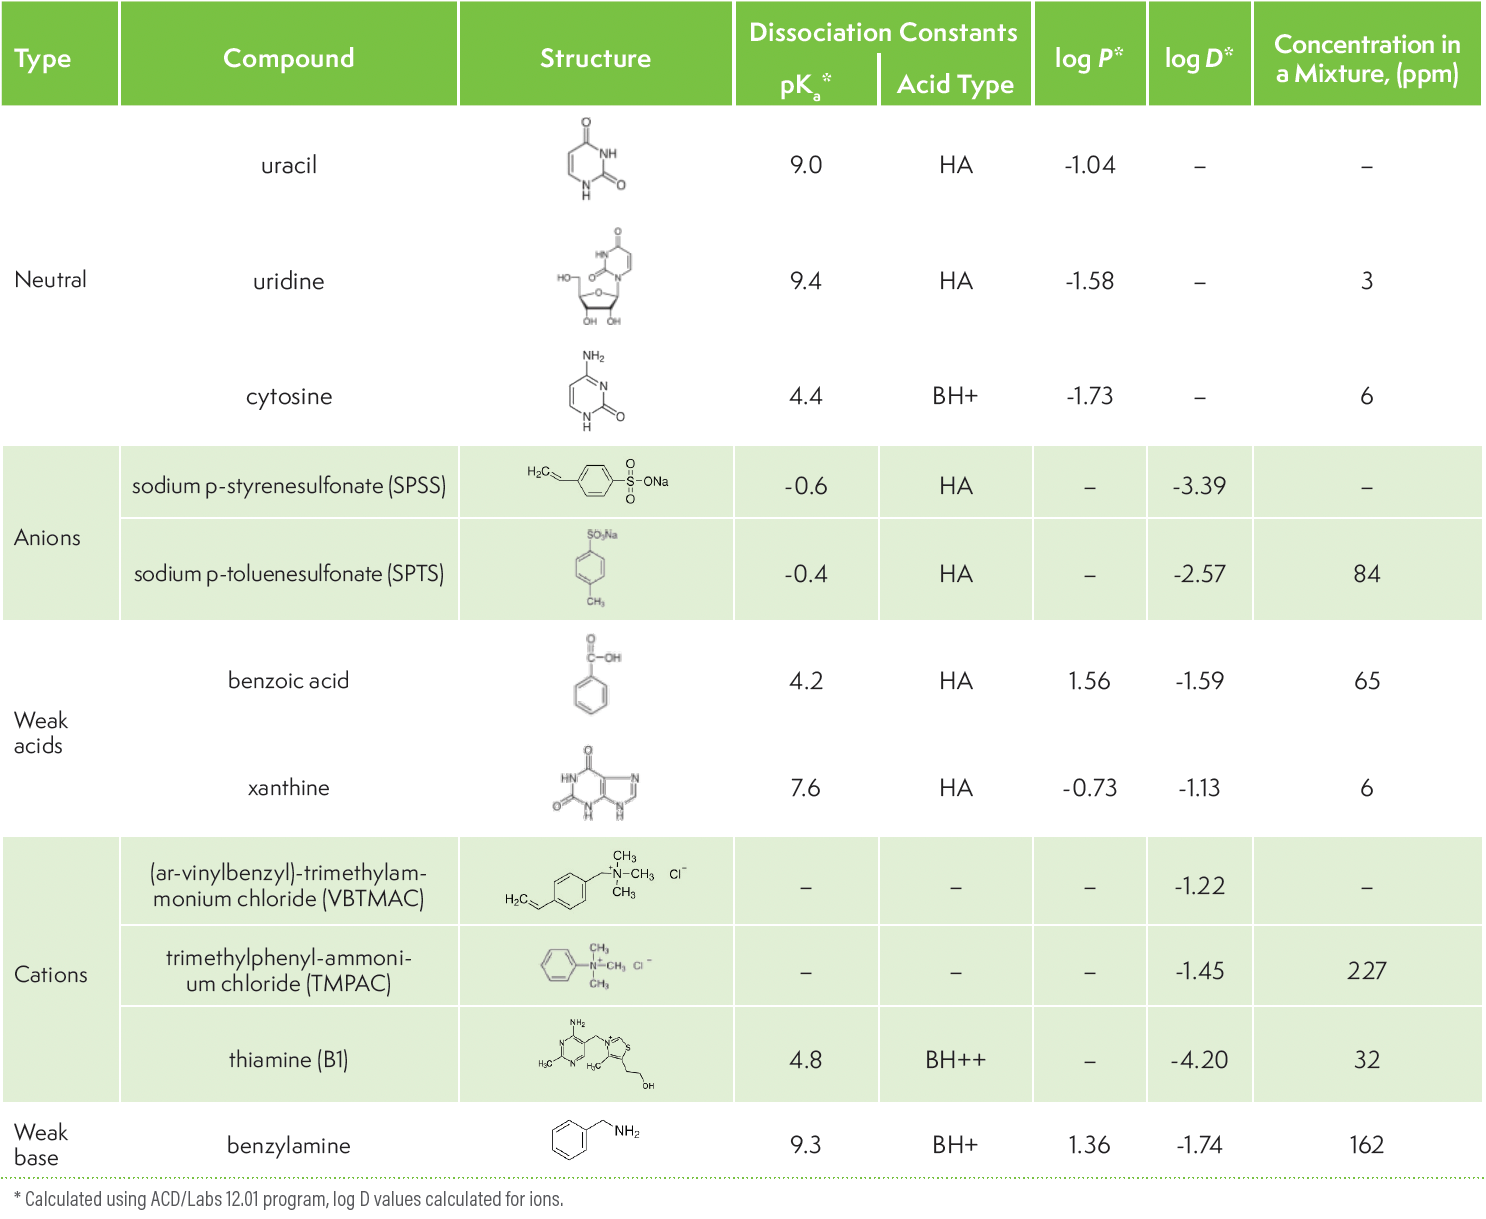 TABLE II: Structures of test compounds, their log P, log D, and pKa values and concentrations in a mixture